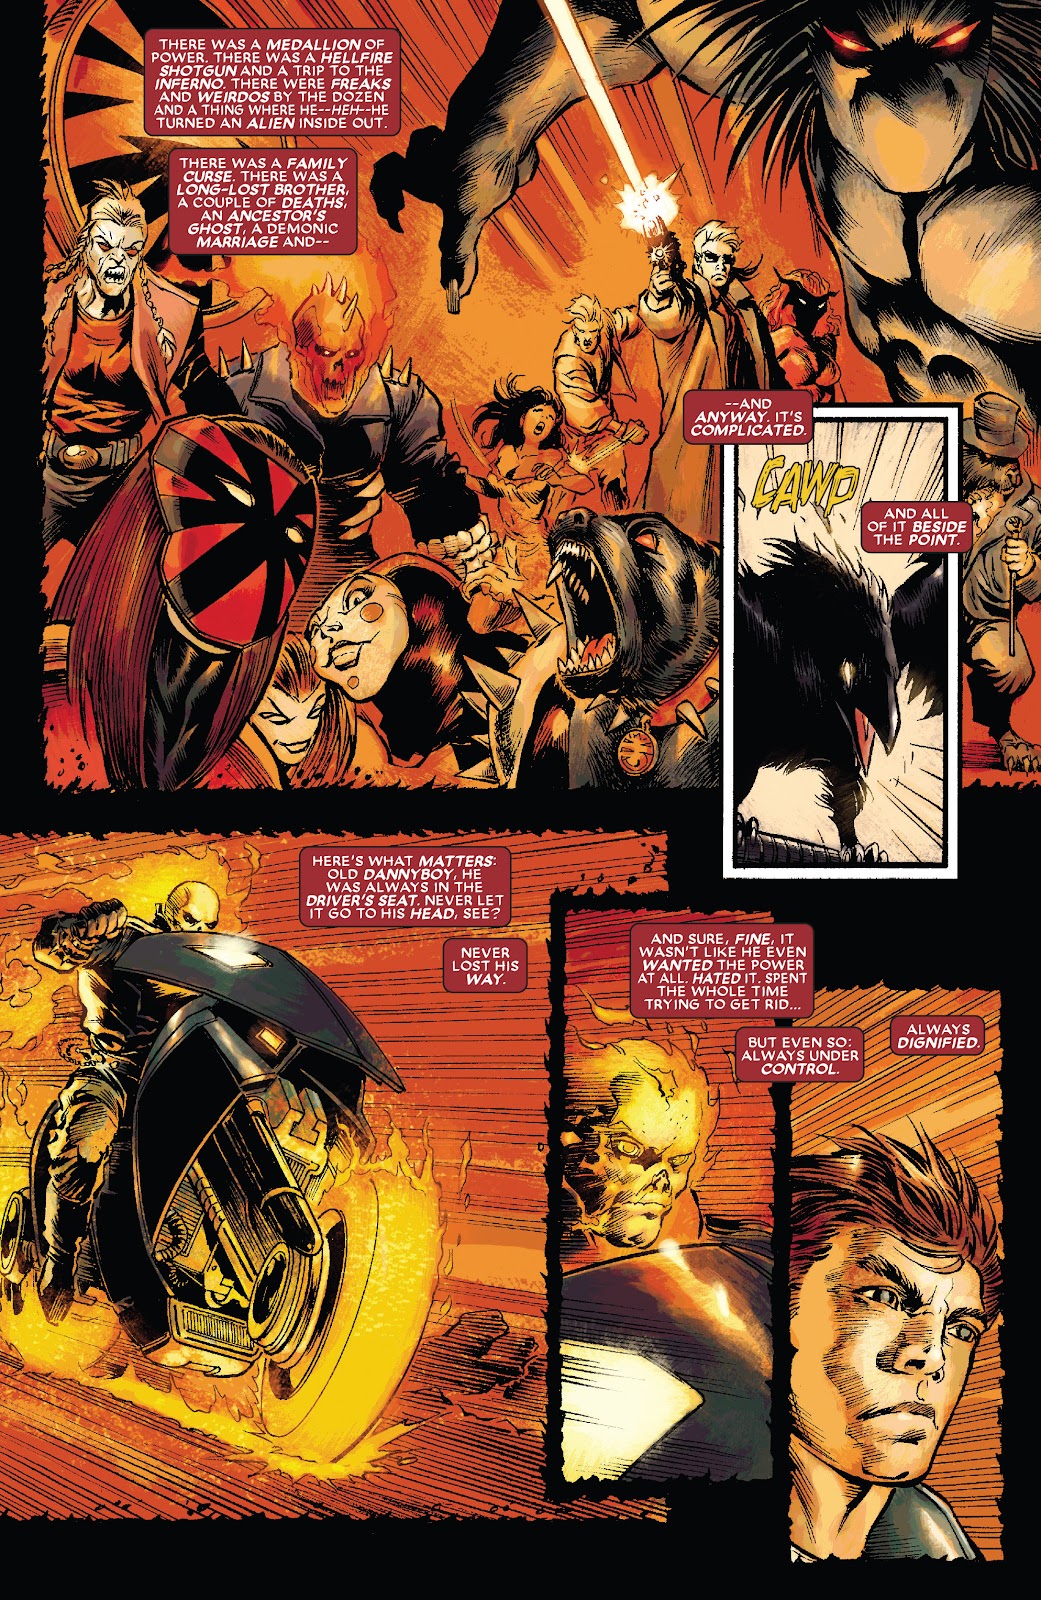 Ghost Rider: Danny Ketch issue 1 - Page 4